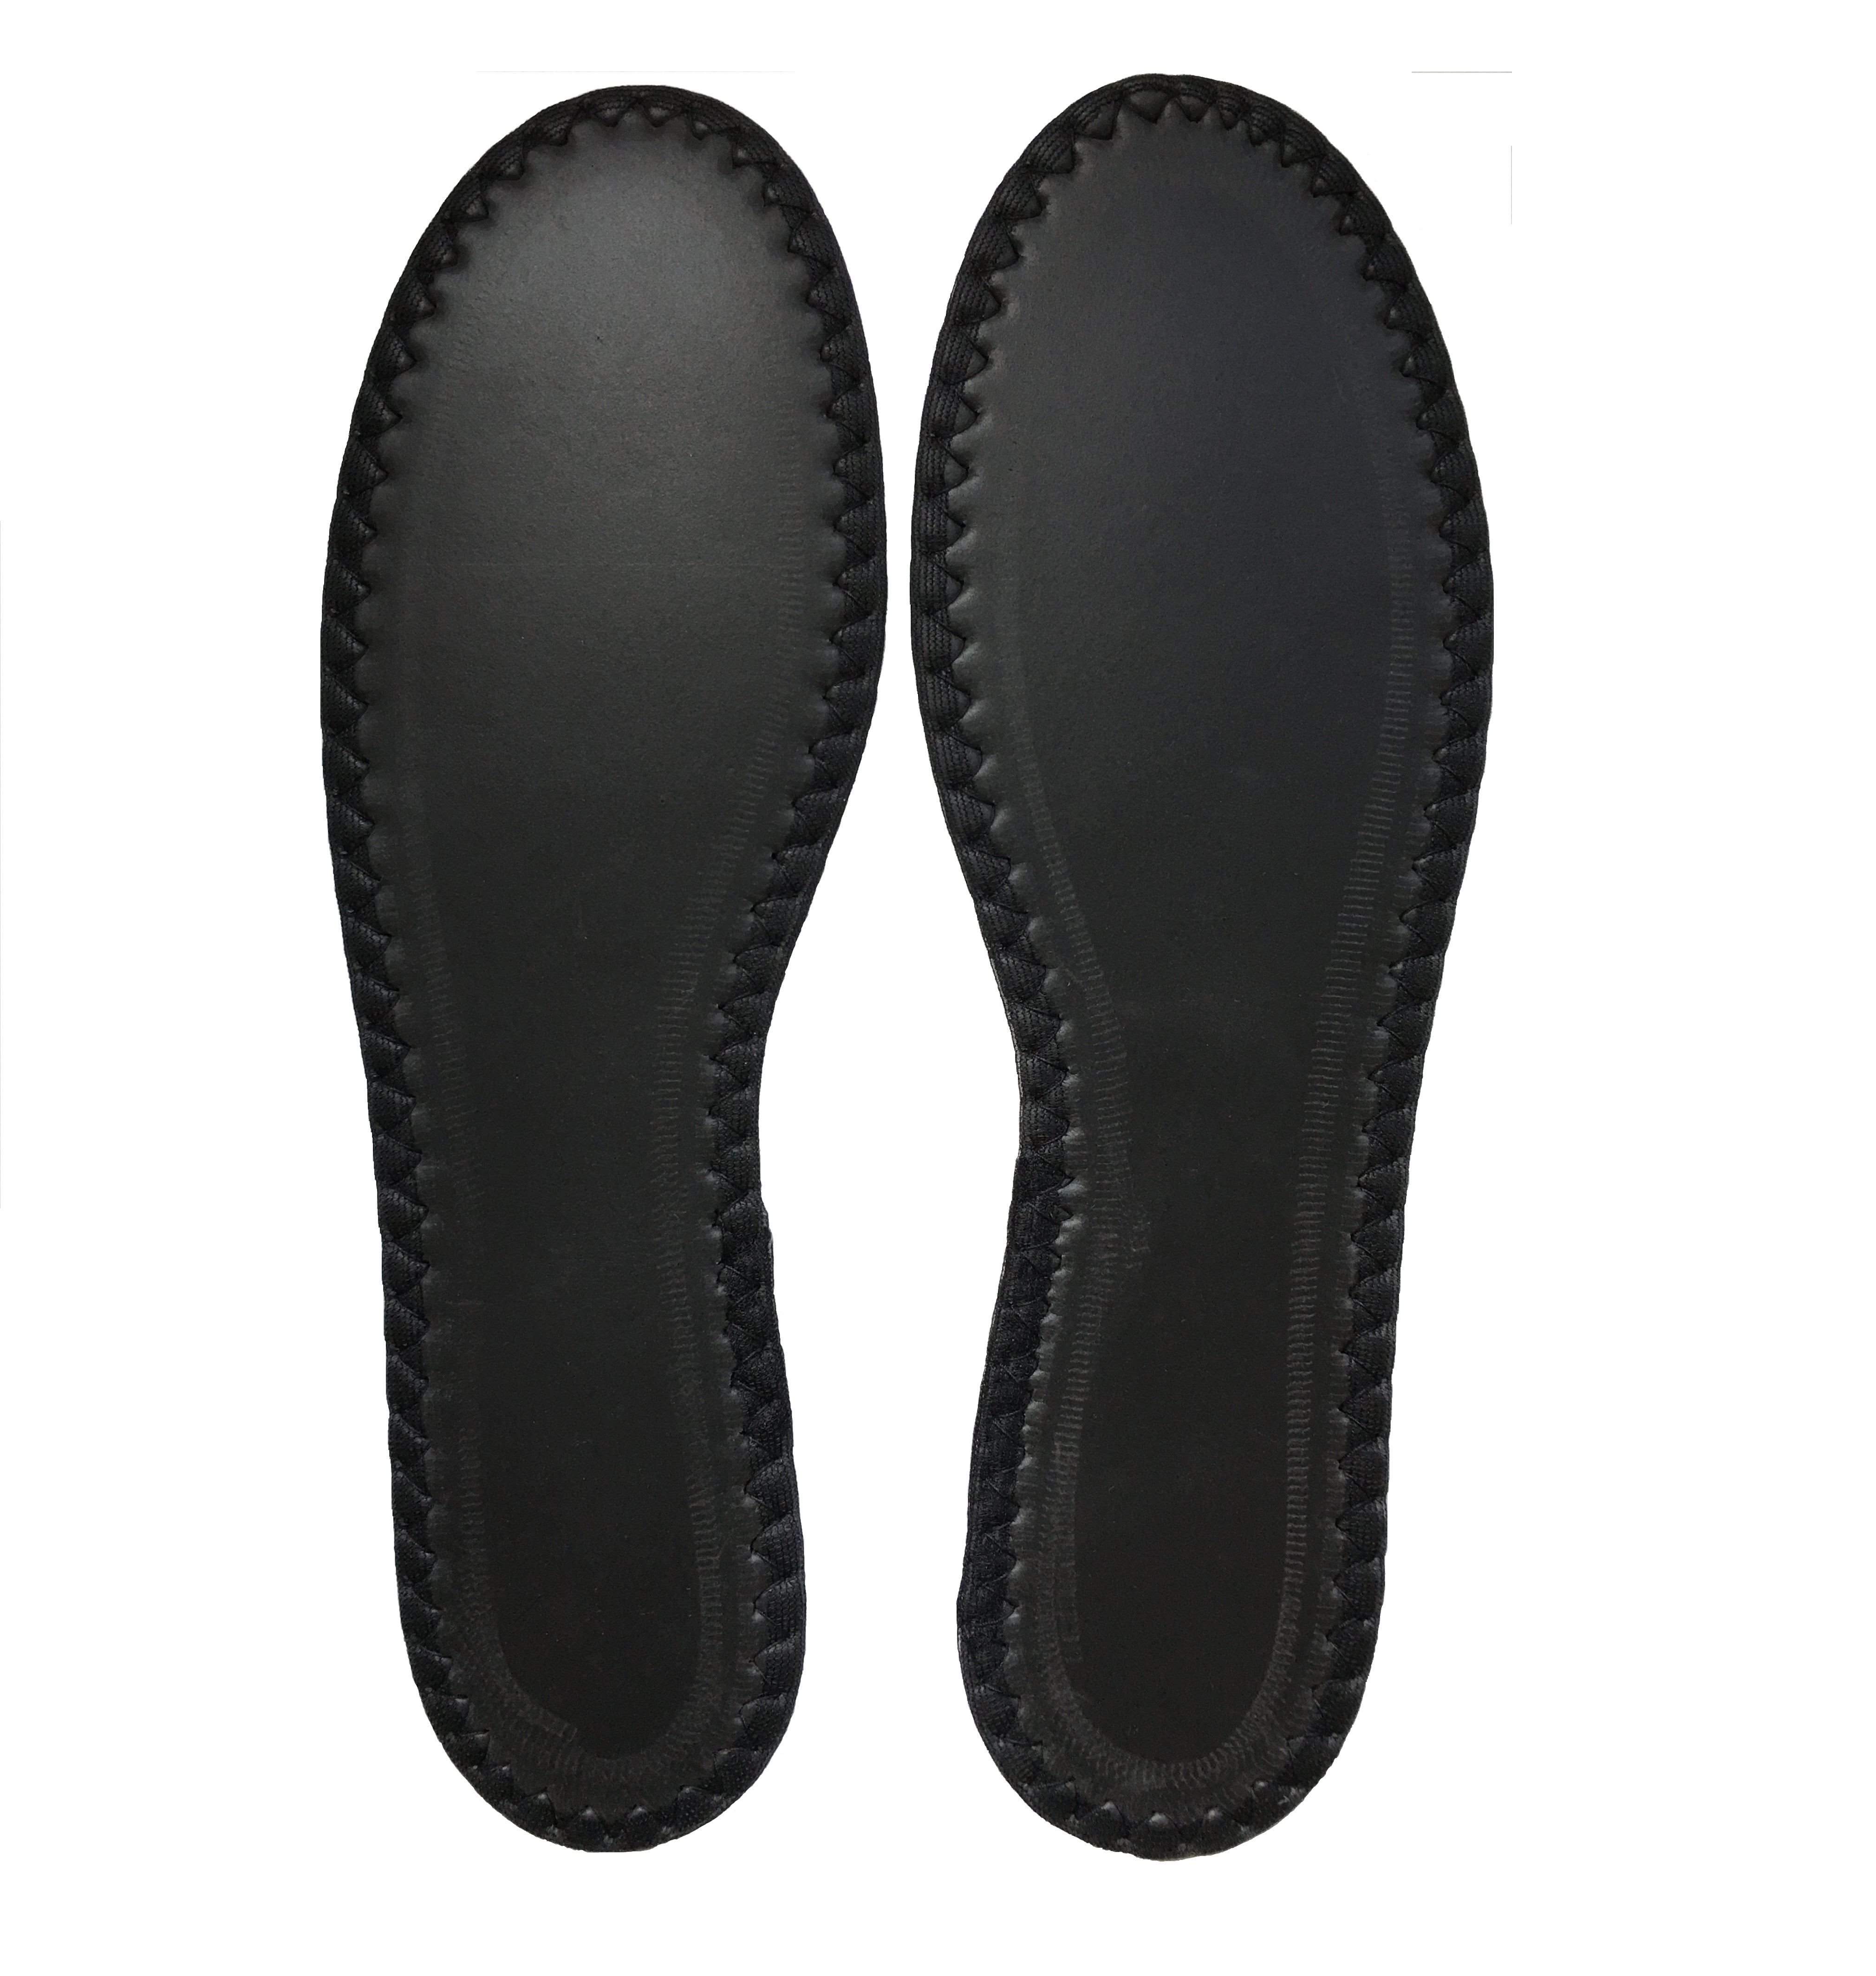 washable insoles for sweaty feet